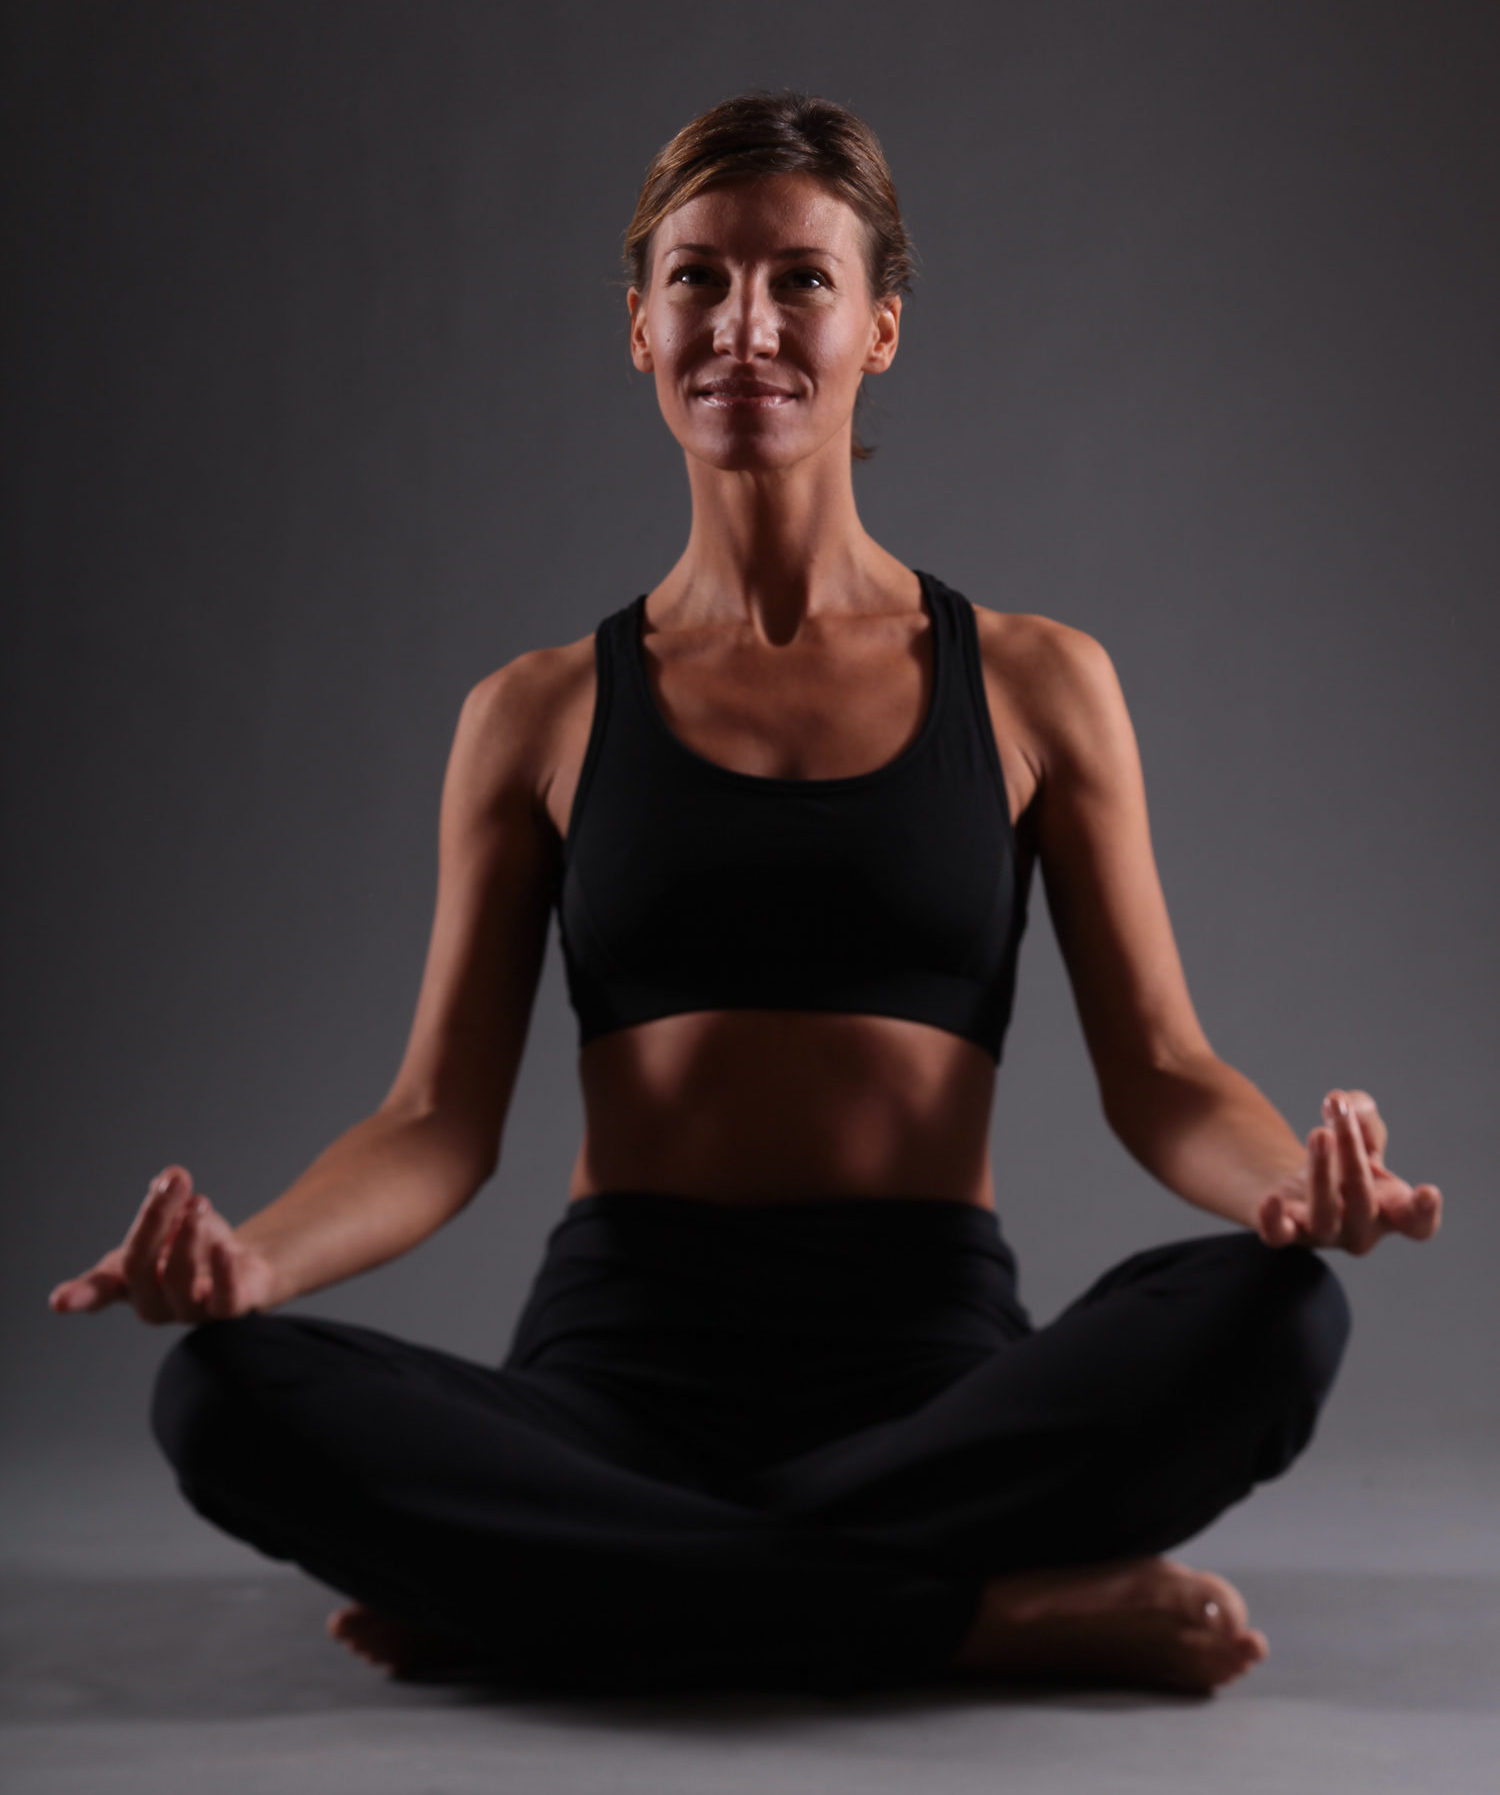 MS, General Health, and Yoga: Useful Tips for Your Home Yoga Space